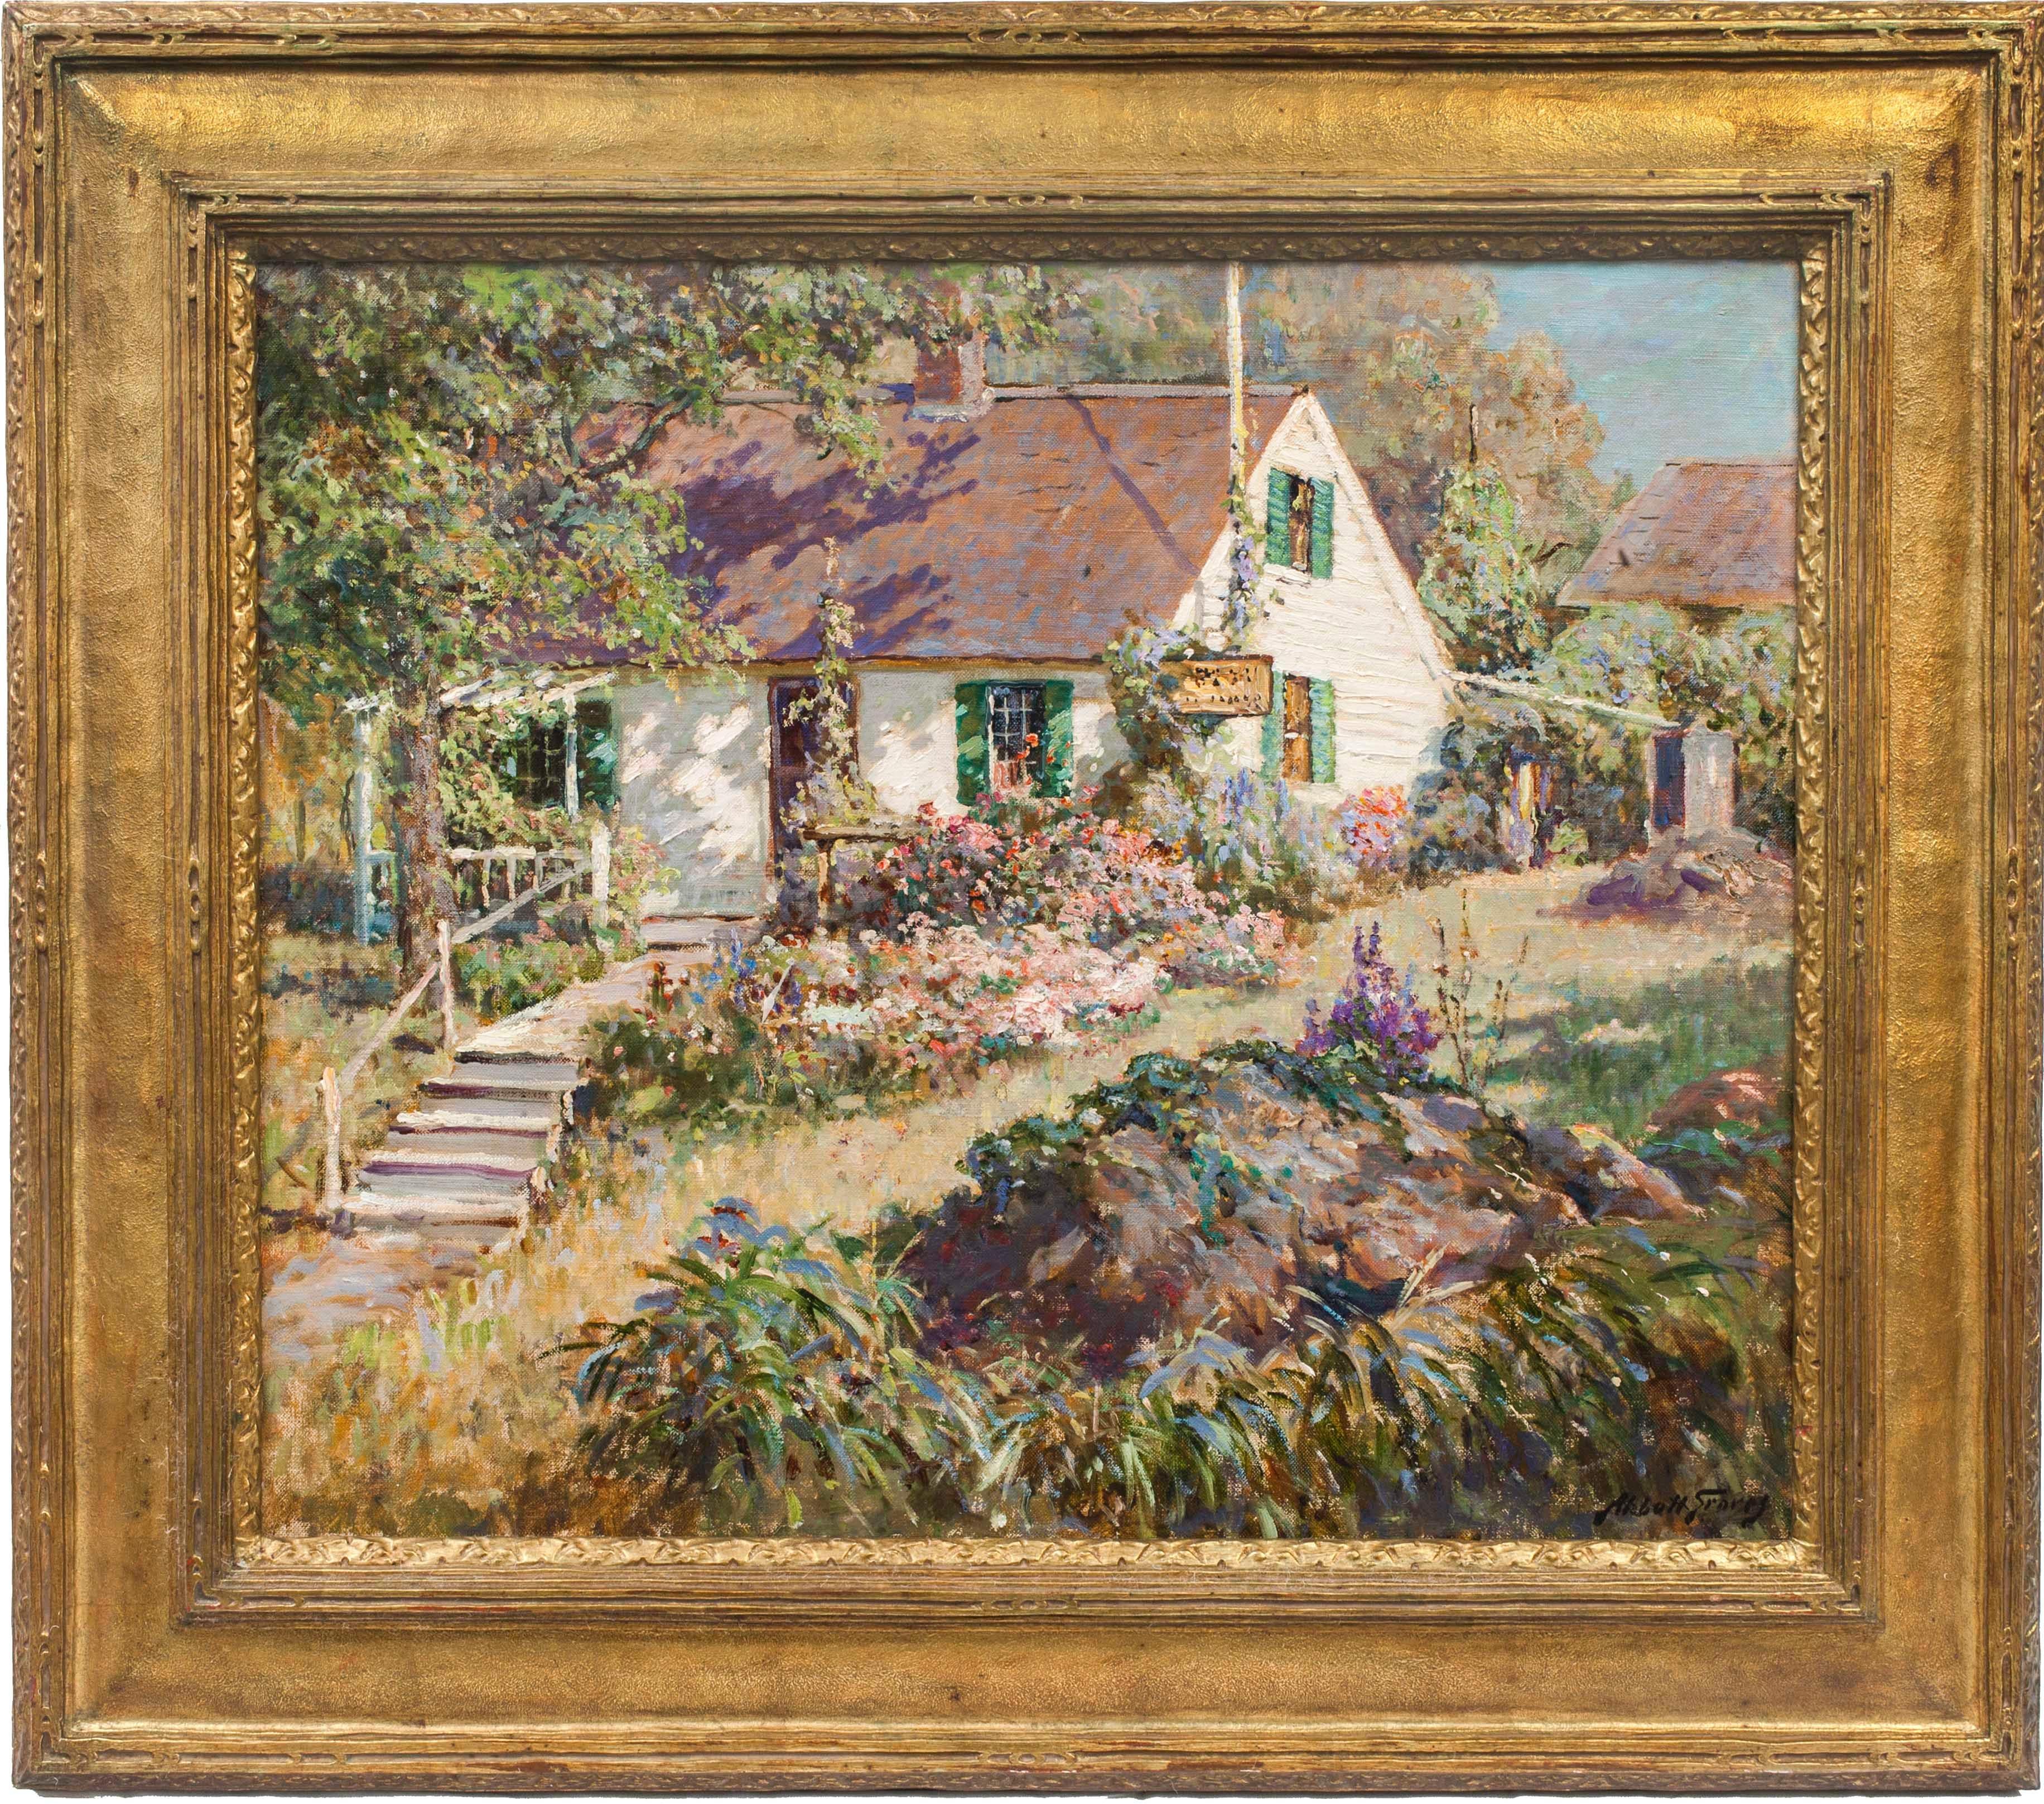 Abbott Fuller Graves (1859-1936)
The Cottage Garden
Oil on canvas
25 1/4 x 30 1/8 inches
Signed lower right